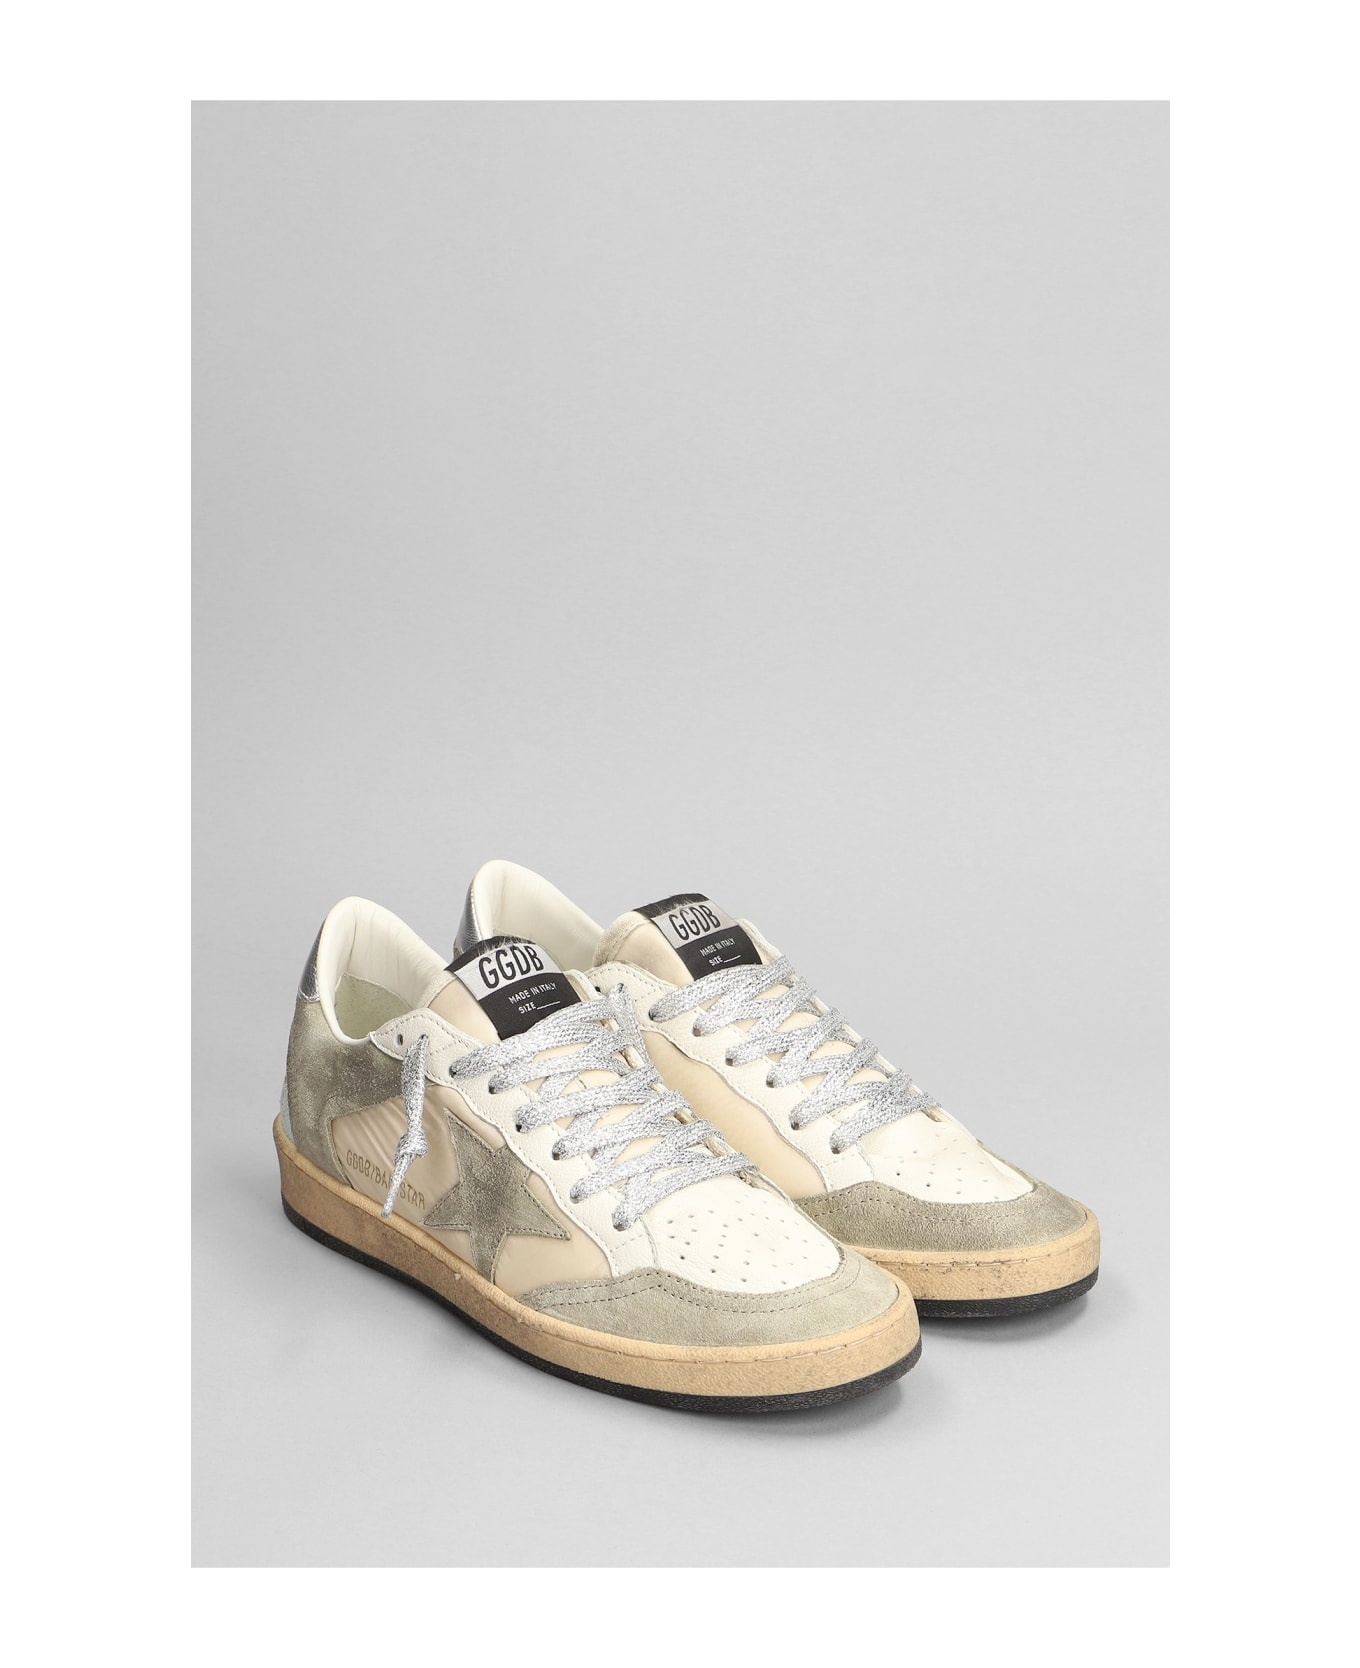 Ball Star Sneakers In Beige Leather And Fabric - 2